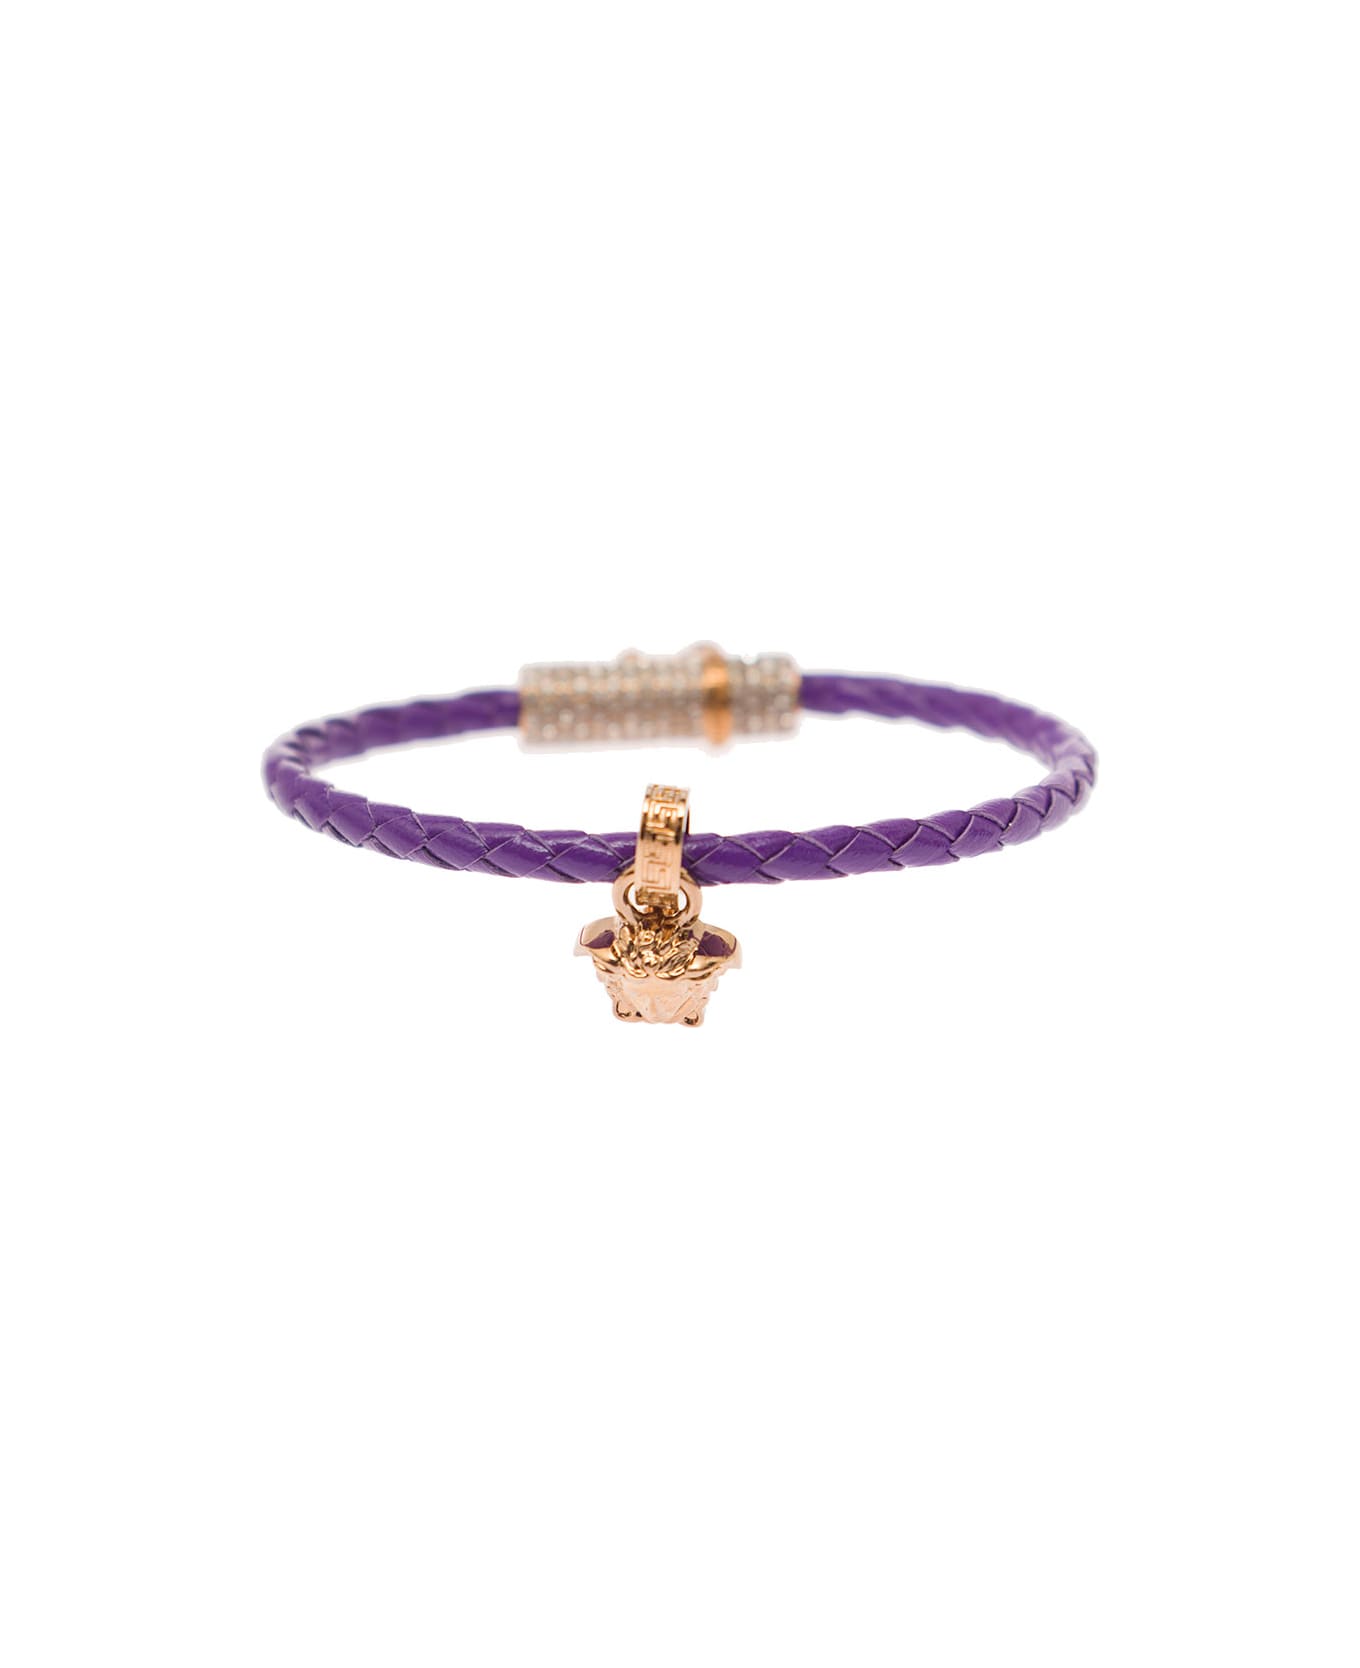 Versace Medusa Plaque Detail Bracelt In Gold-tone Brass And Purple Leather Woman - Violet ブレスレット